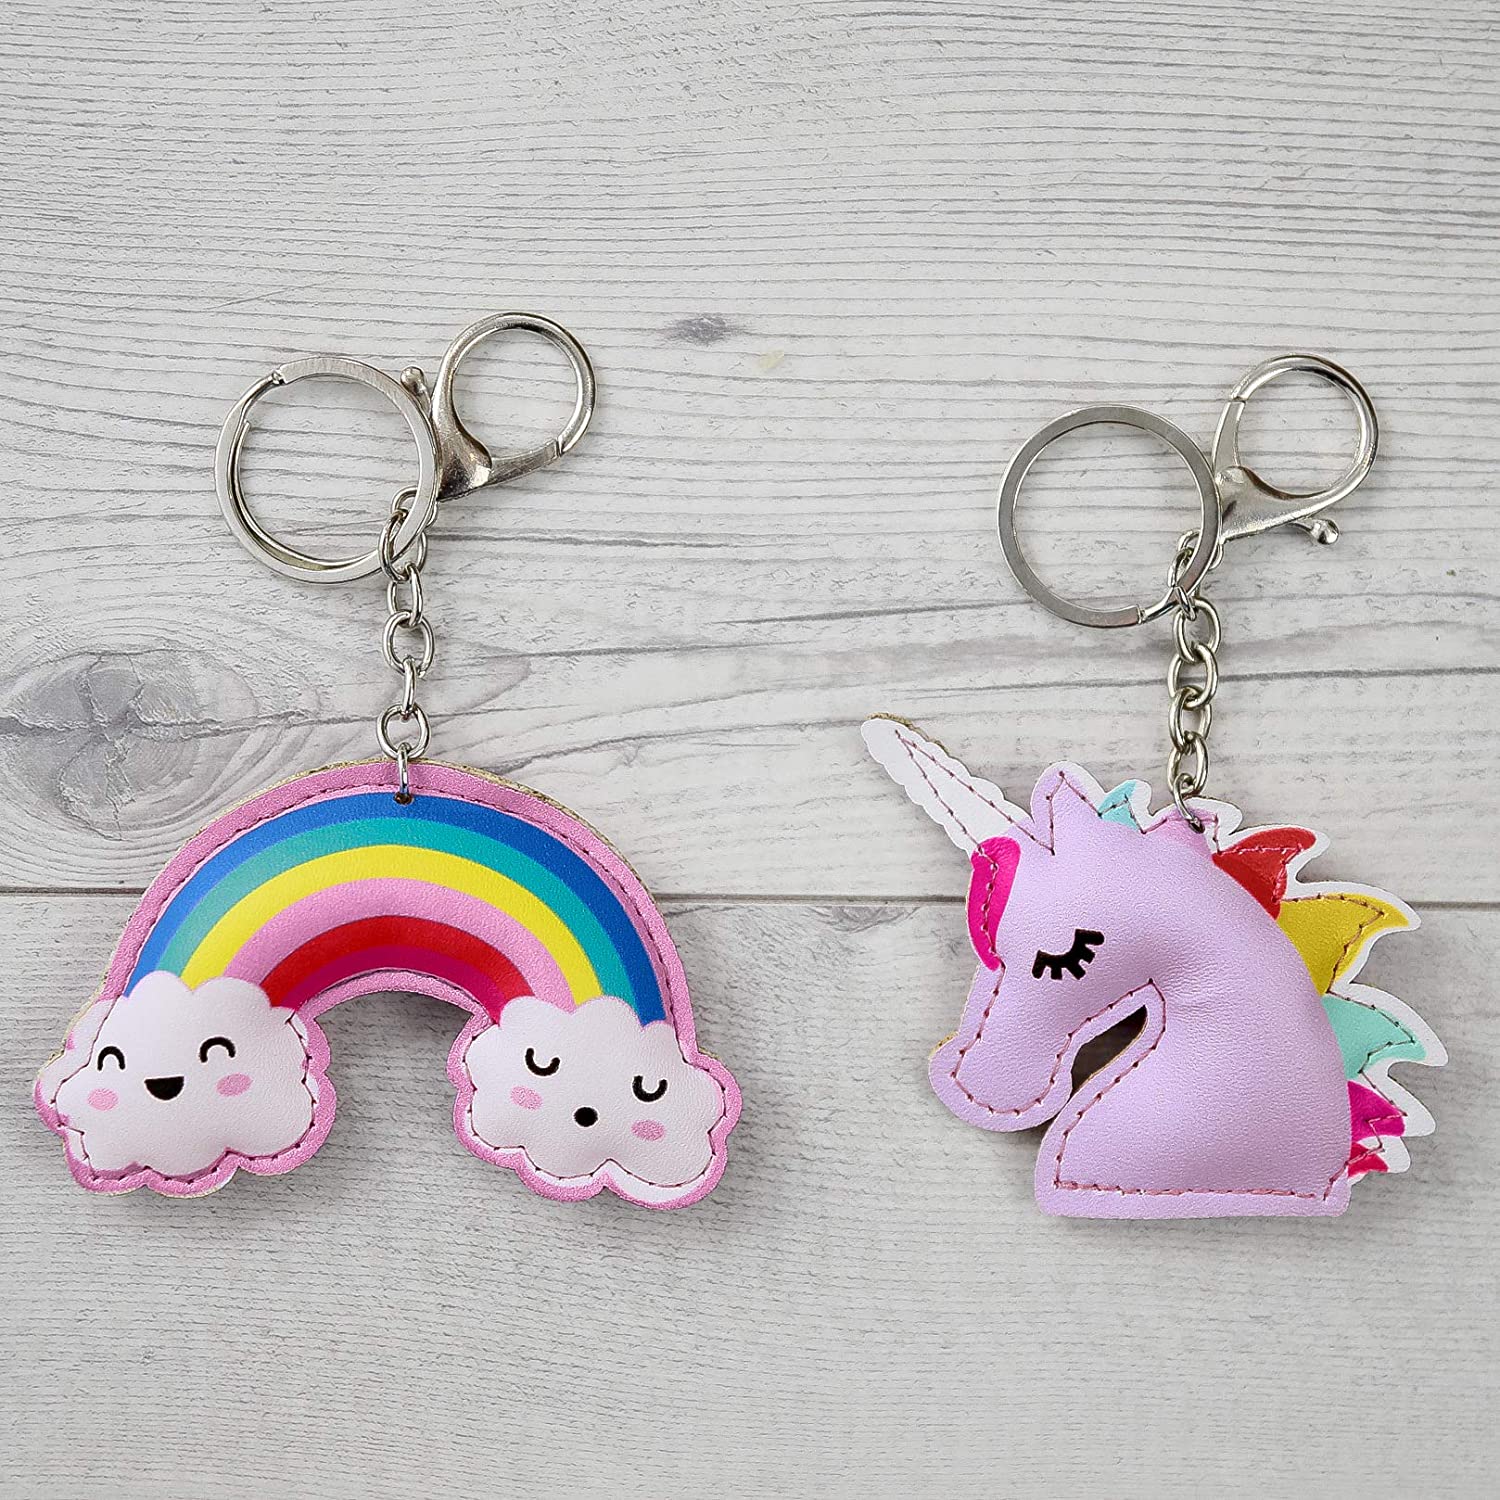 Keyring unicorn and rainbow goodies and its packaging for birthday or surprise party